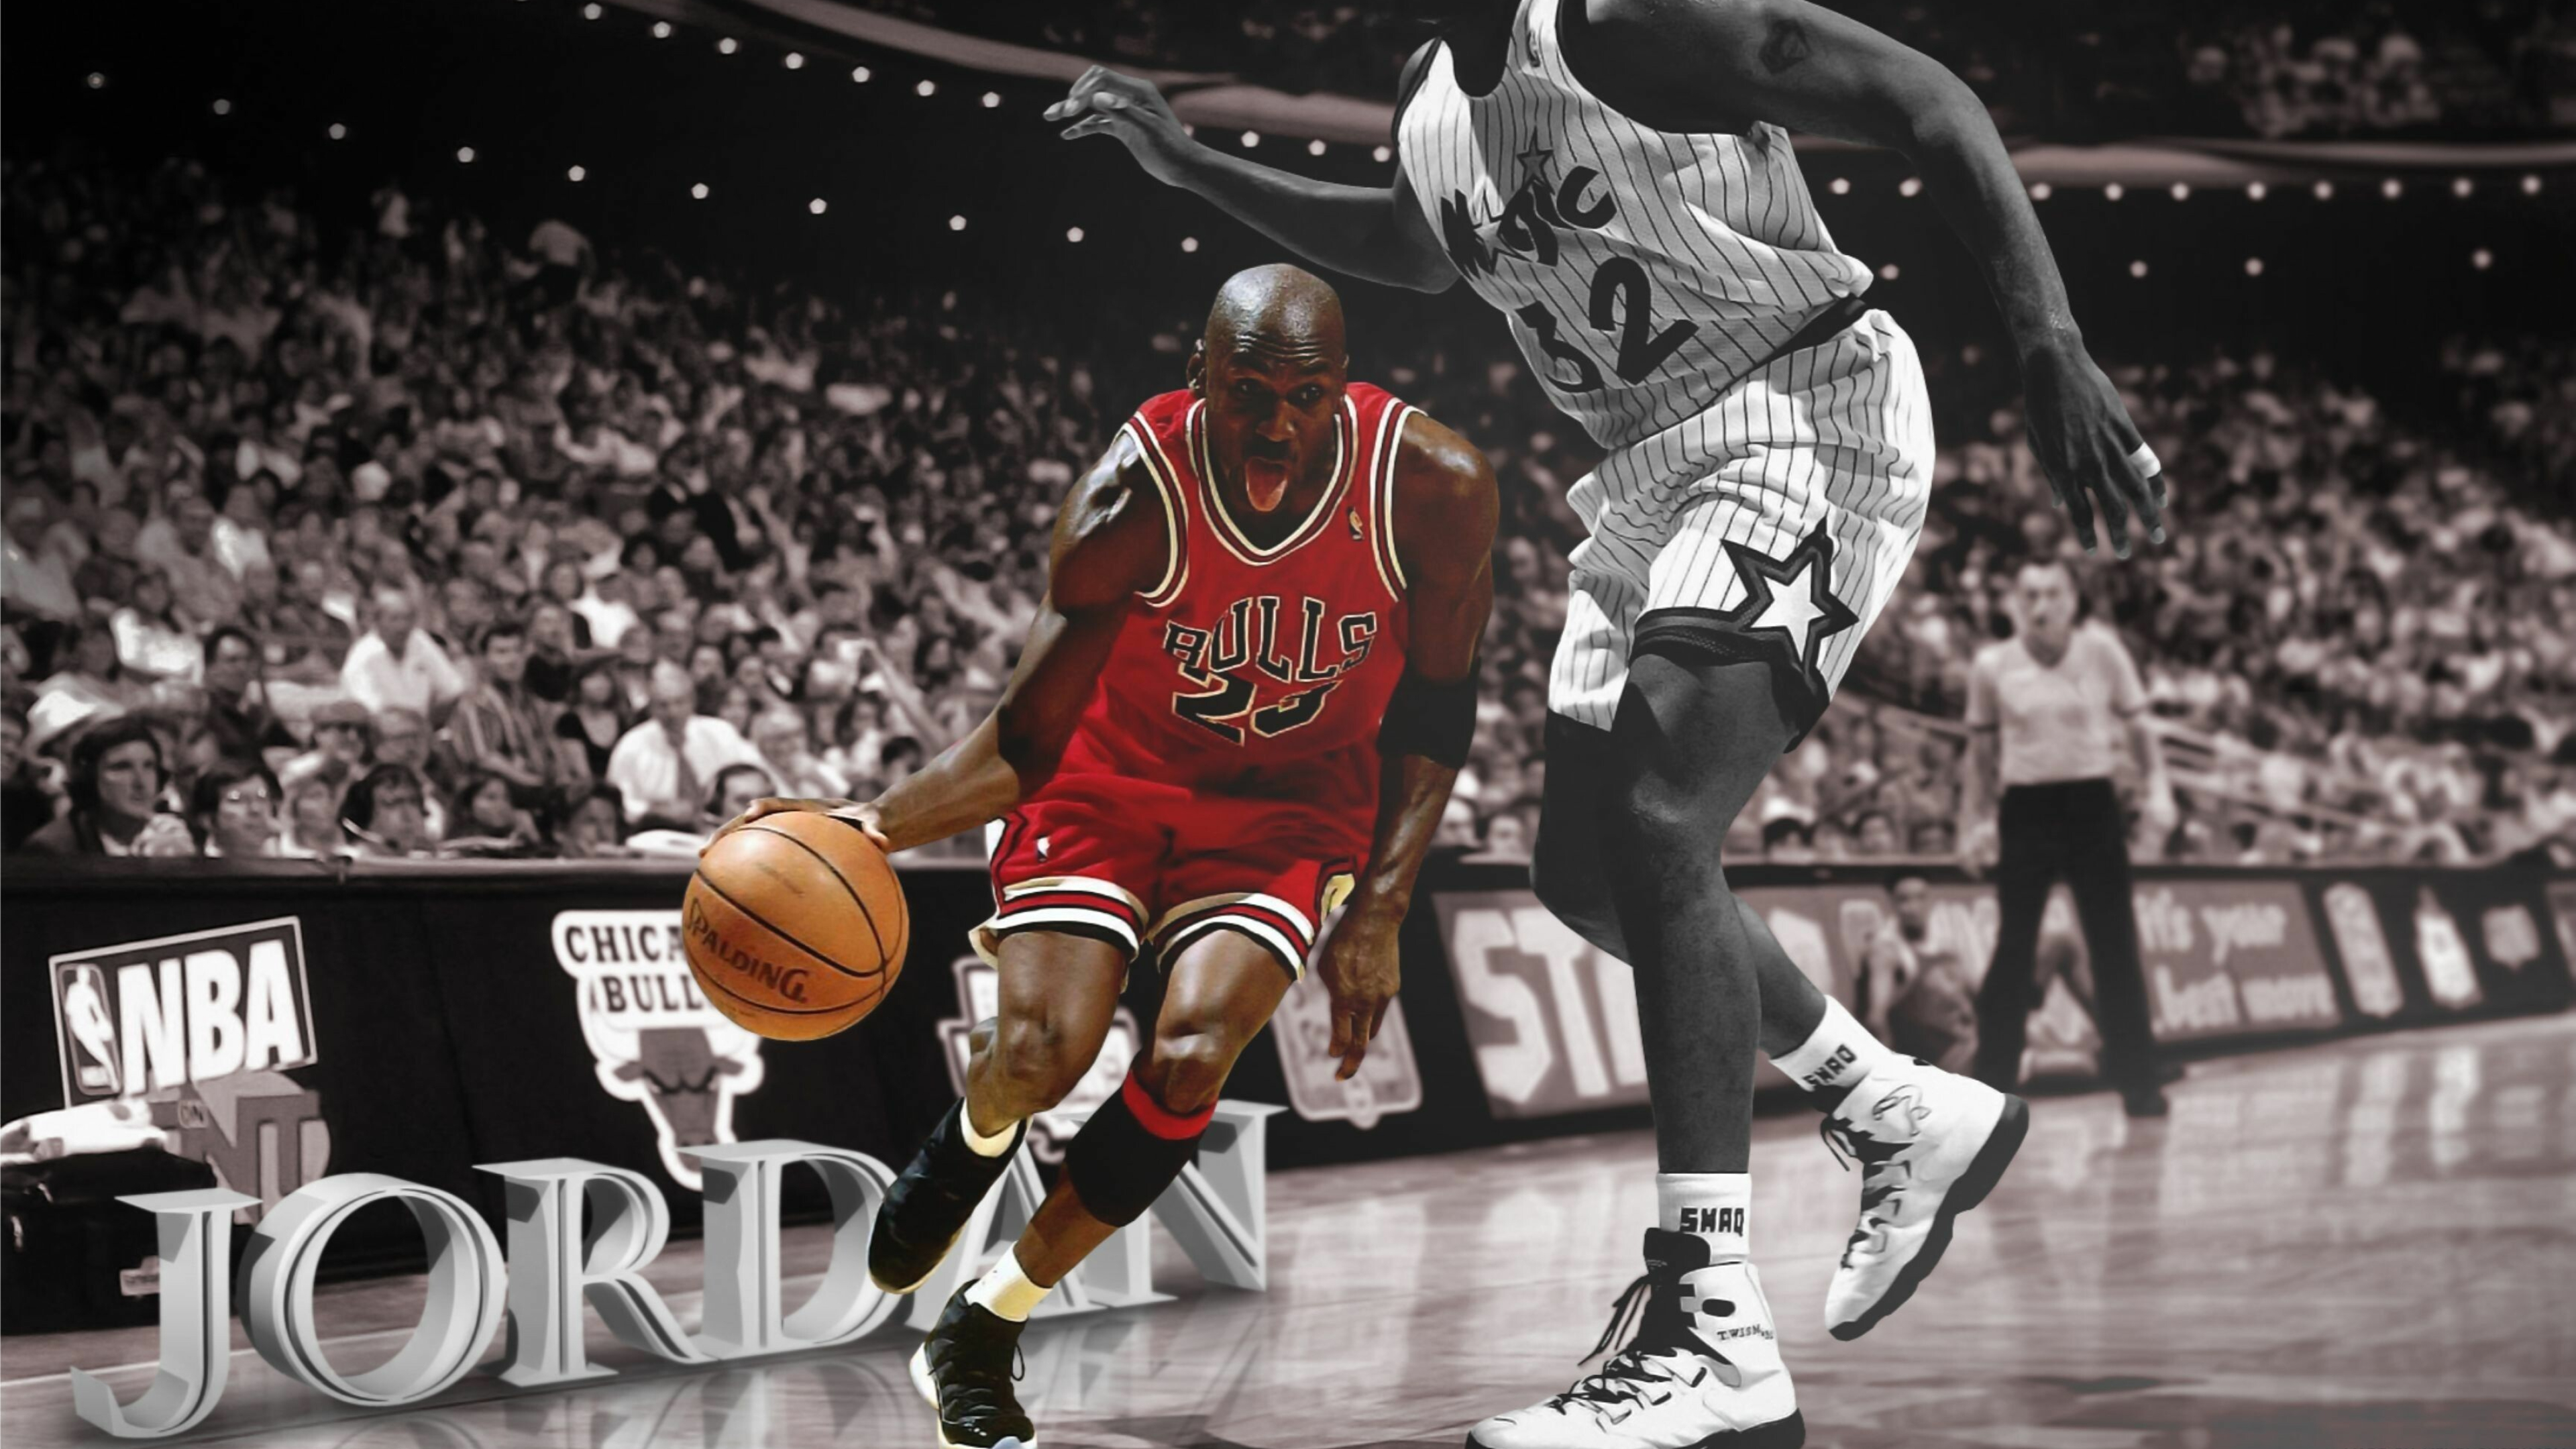 Michael Jordan: The greatest basketball player of all time, Known by his initials MJ. 3840x2160 4K Background.